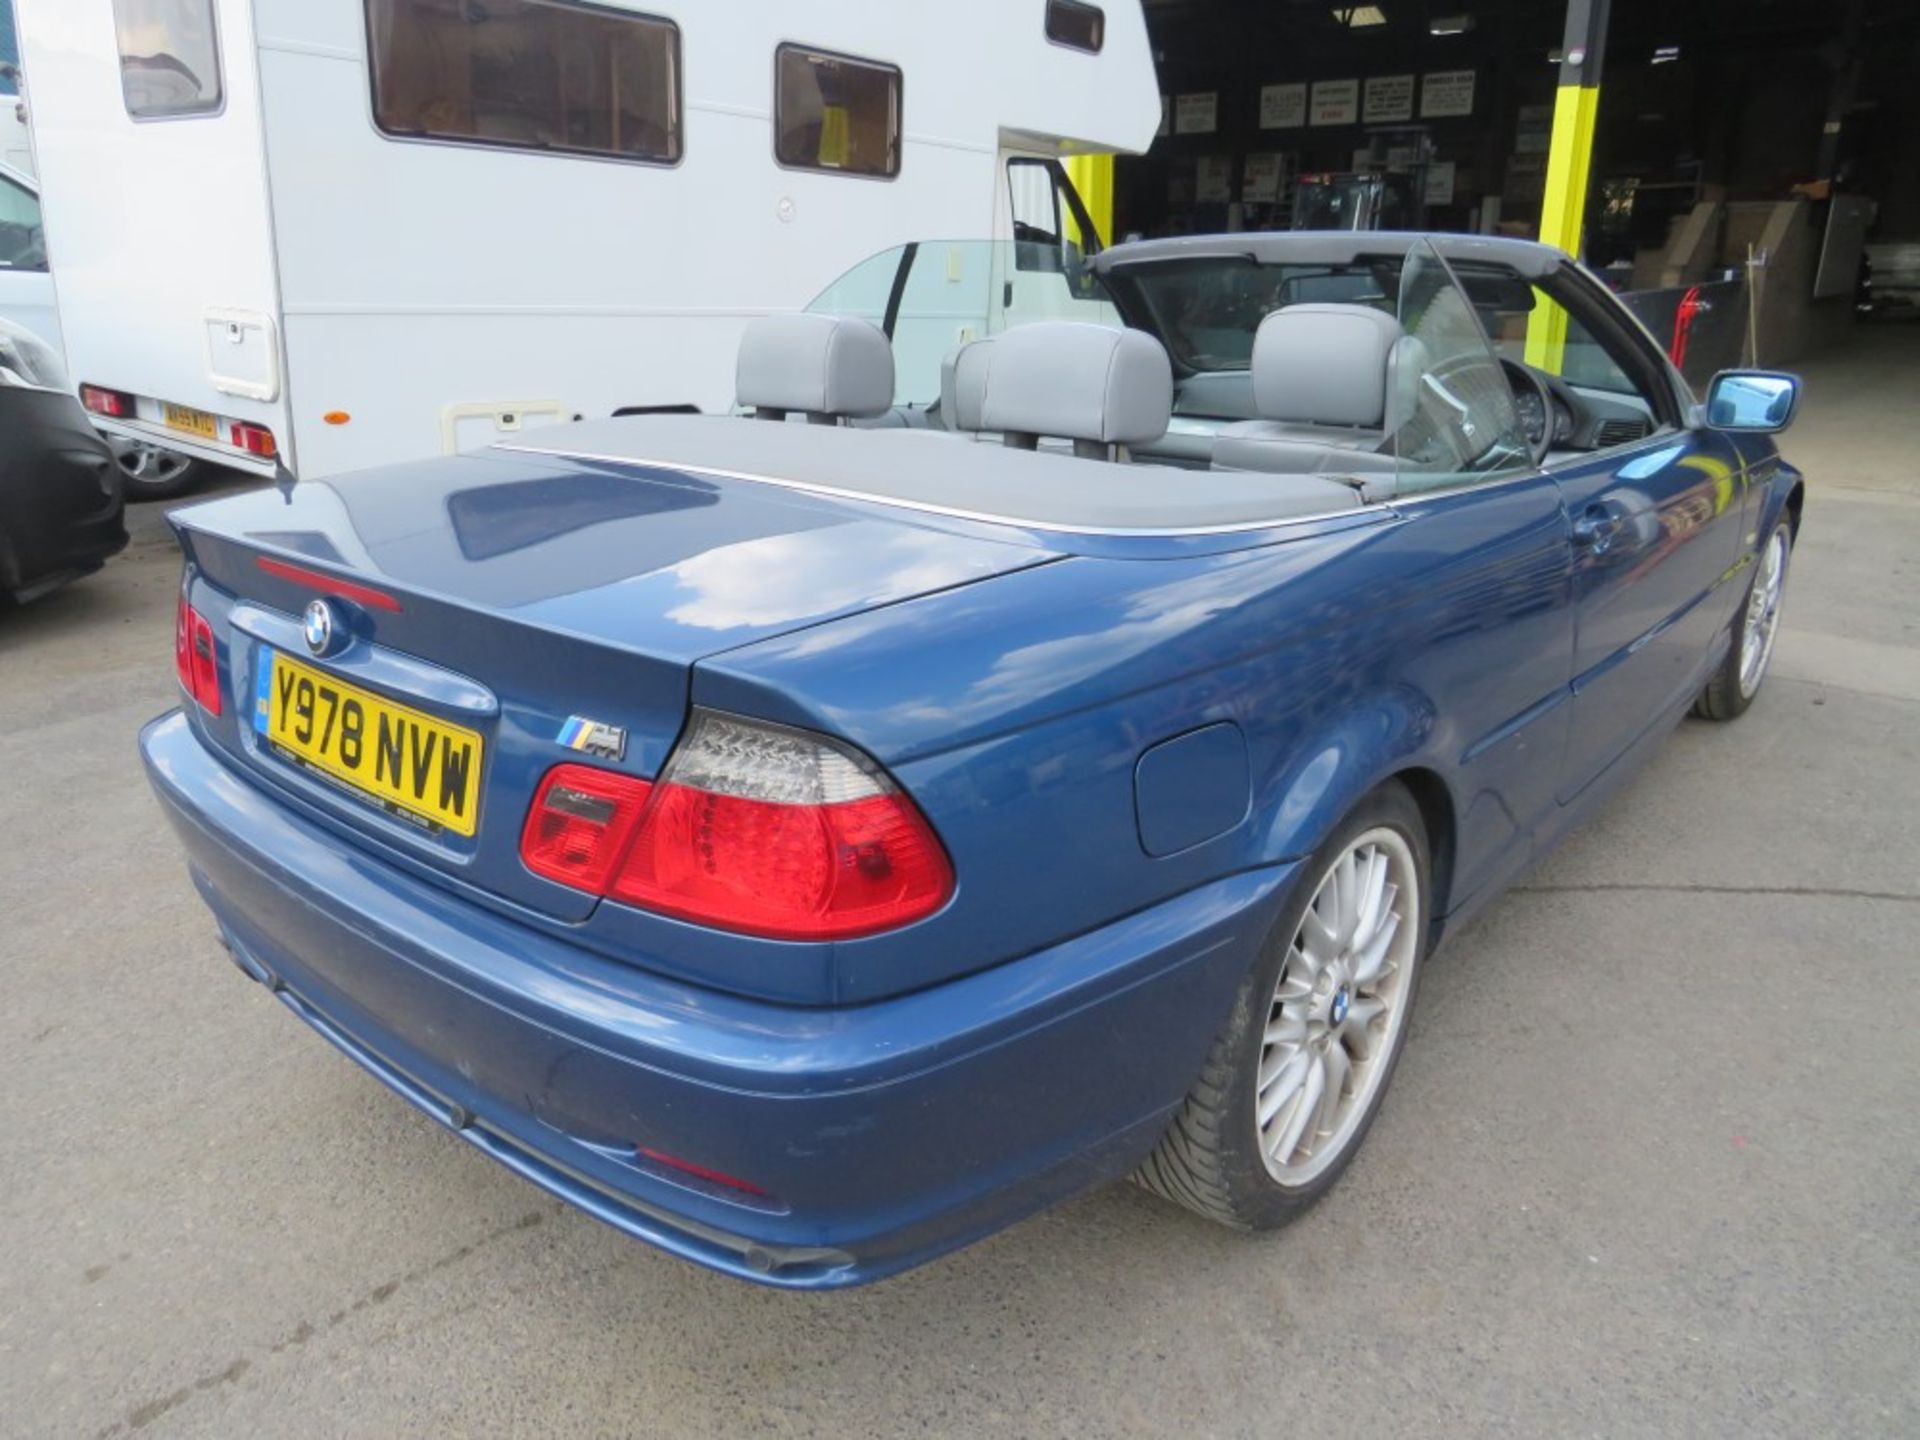 Y reg BMW 320CI CONVERTIBLE, 1ST REG 06/01, 166421M, V5 HERE, 8 FORMER KEEPERS [NO VAT] - Image 3 of 5